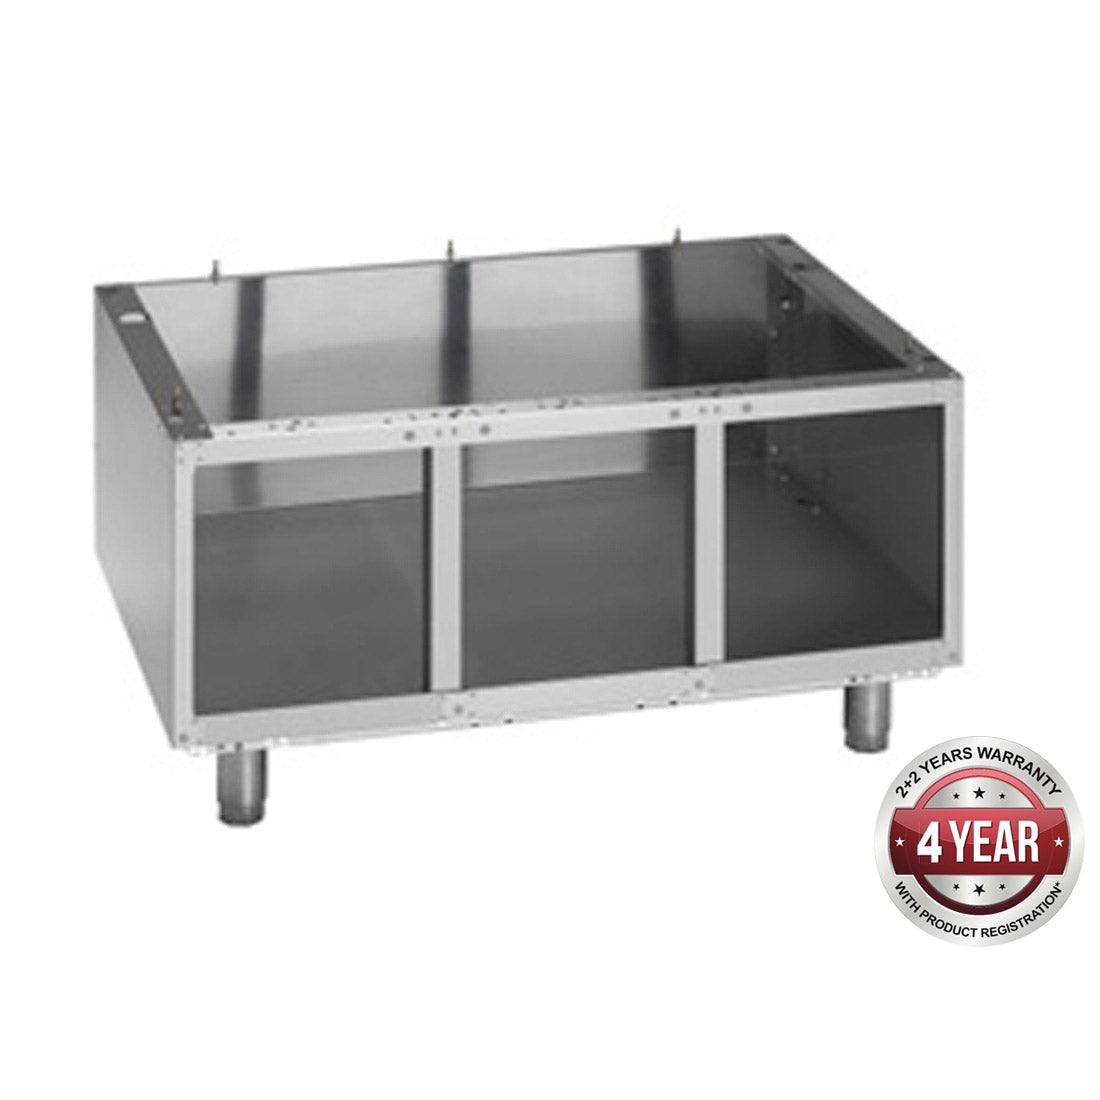 Fagor open front stand to suit -15 models in 700 series MB7-15